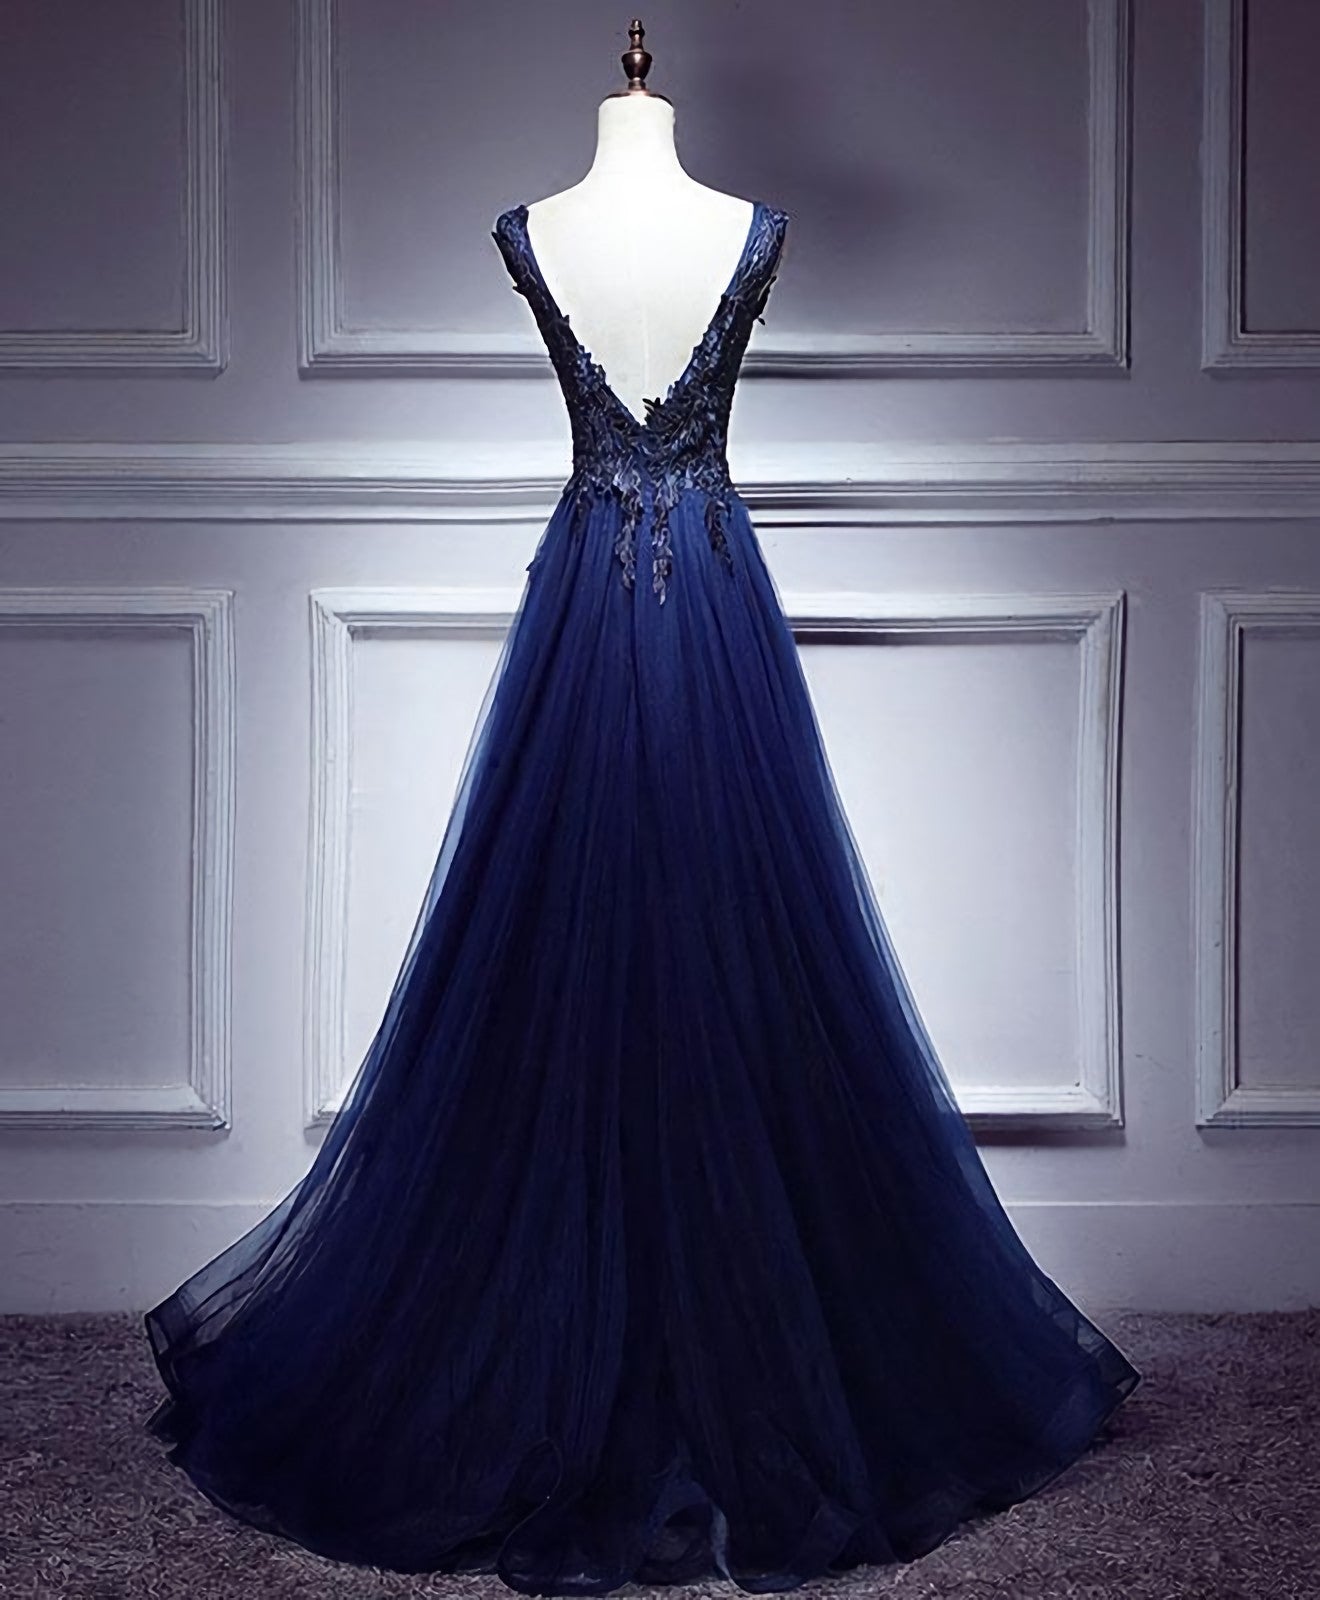 Party Dress Up Ideas Halloween Costumes, Dark Blue Lace V Neck Long Prom Dress, Lace Evening Dress